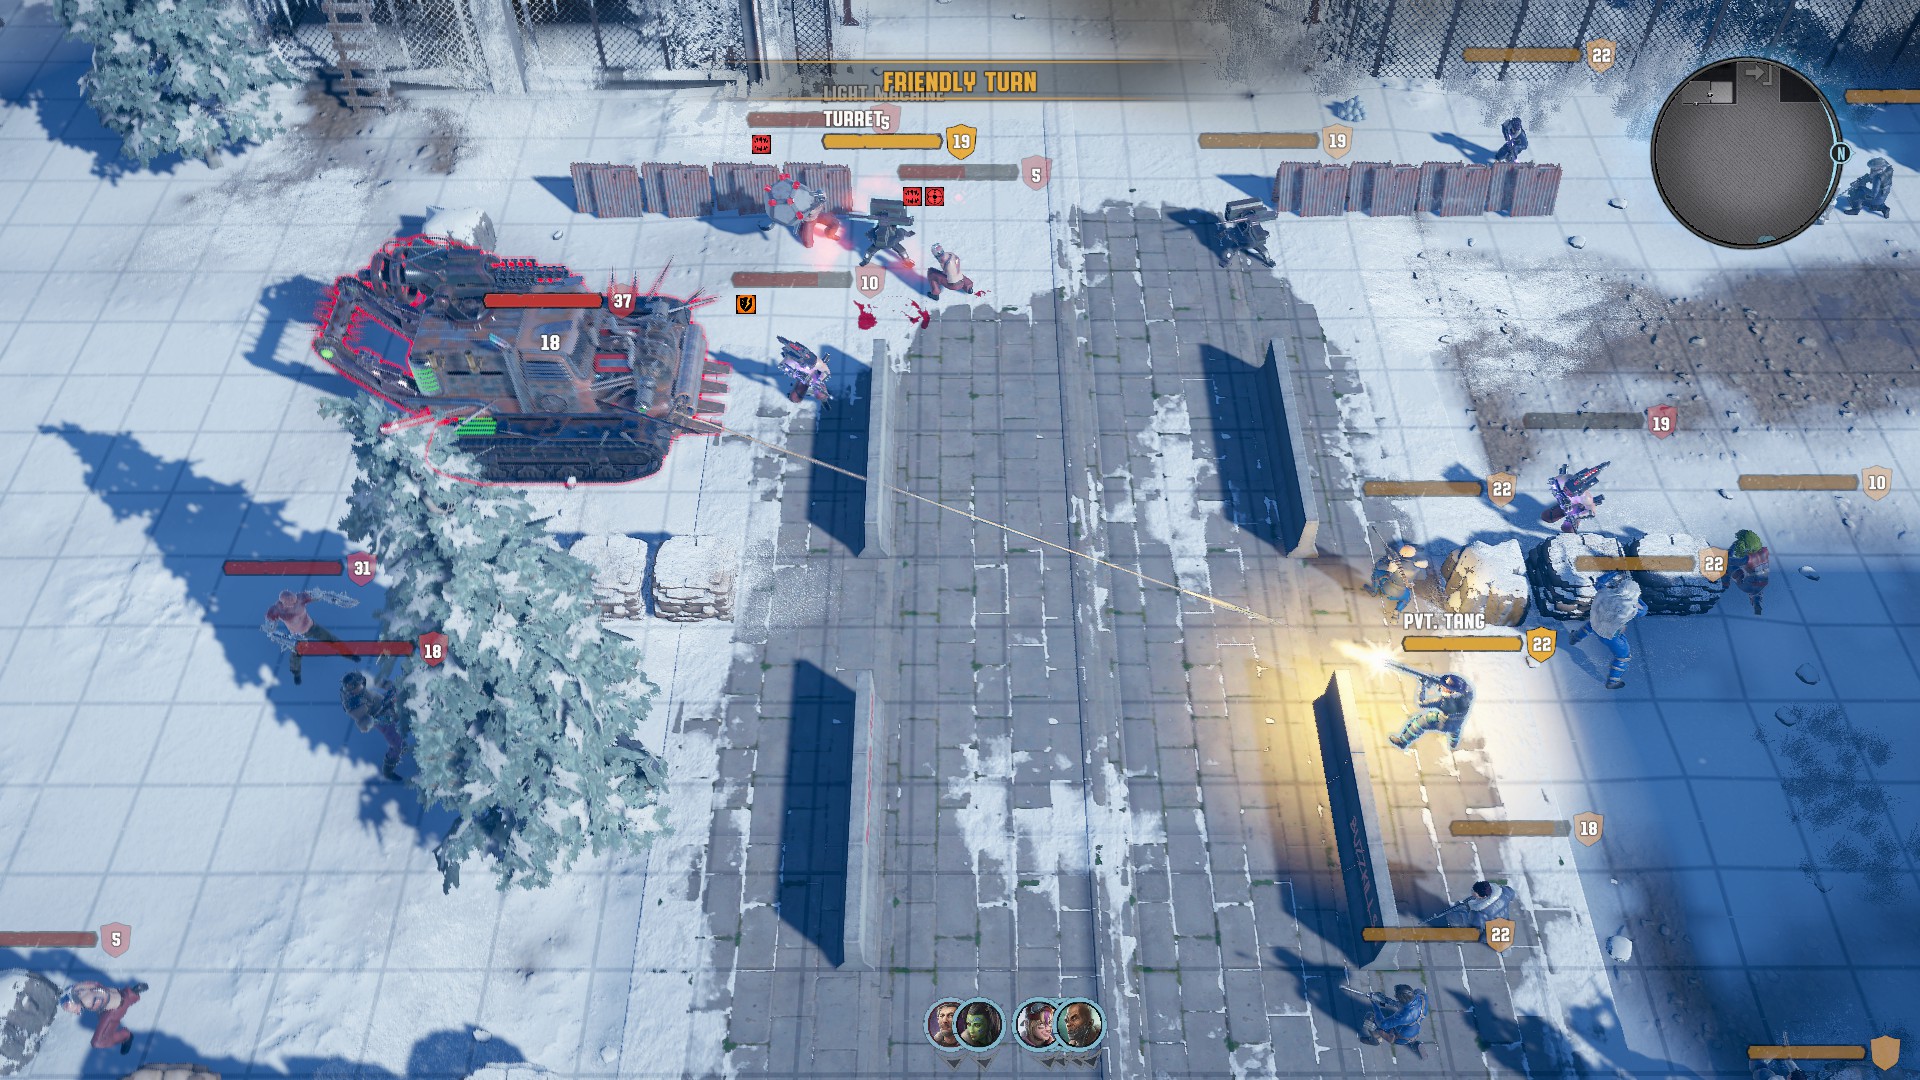 Wasteland 3 isnt 100 hours long unless you want it to be